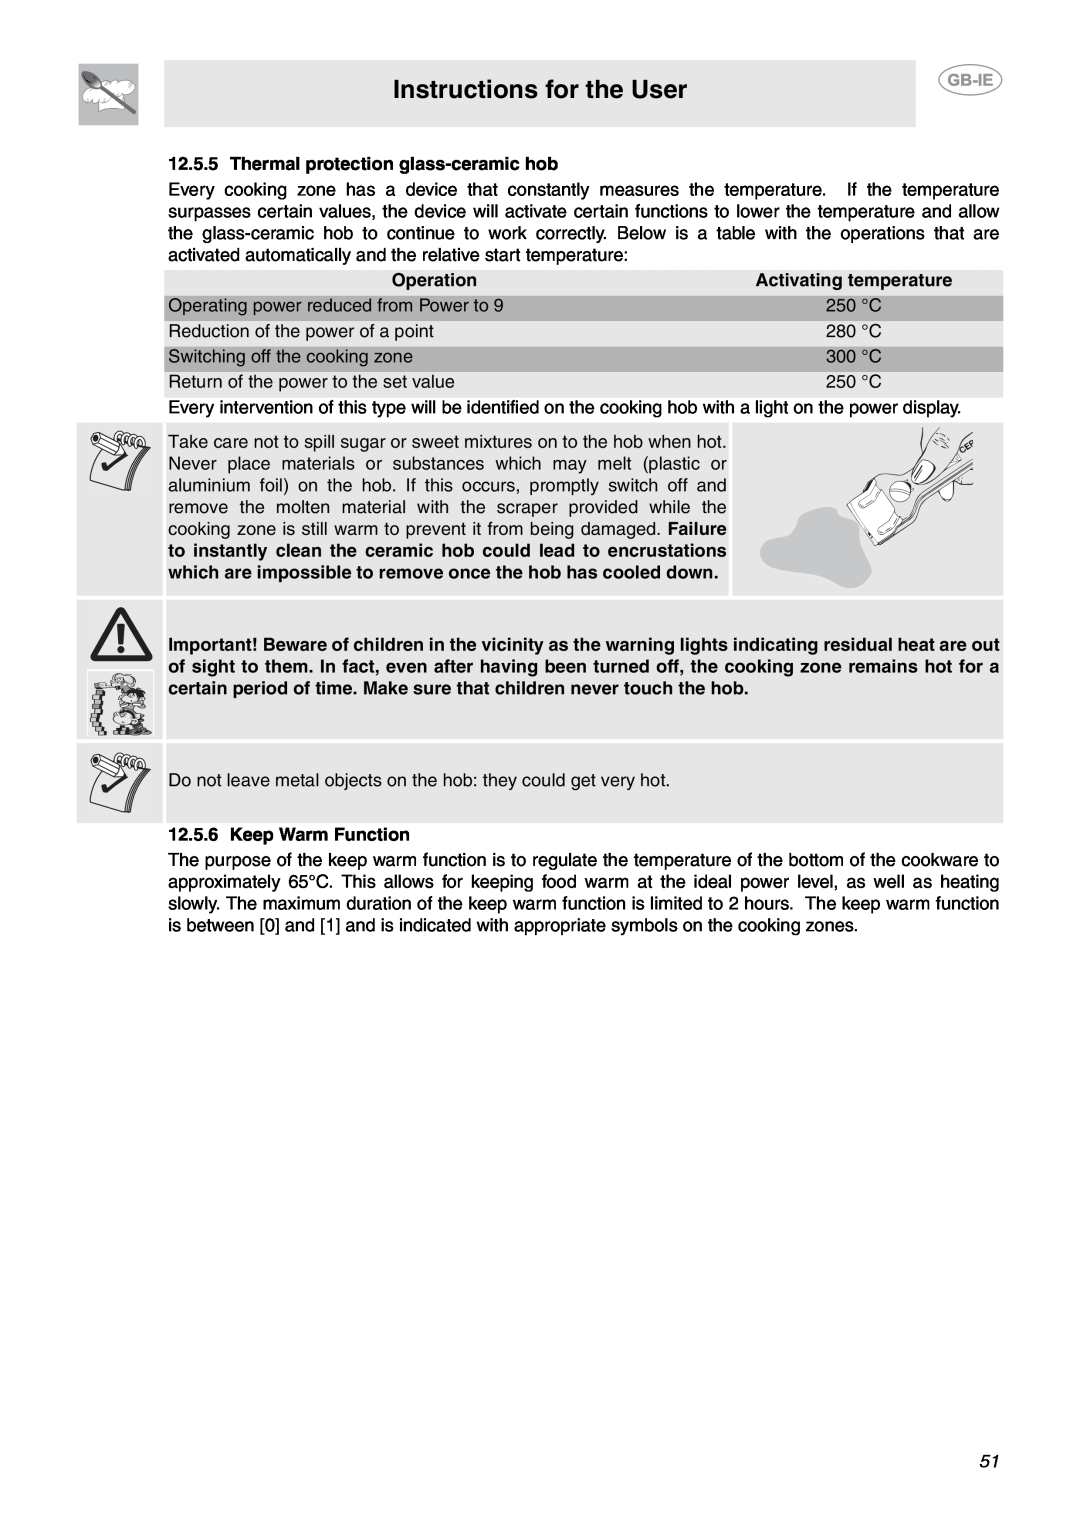 Smeg CE9IMX manual Instructions for the User, Thermal protection glass-ceramic hob, Operation, Activating temperature 